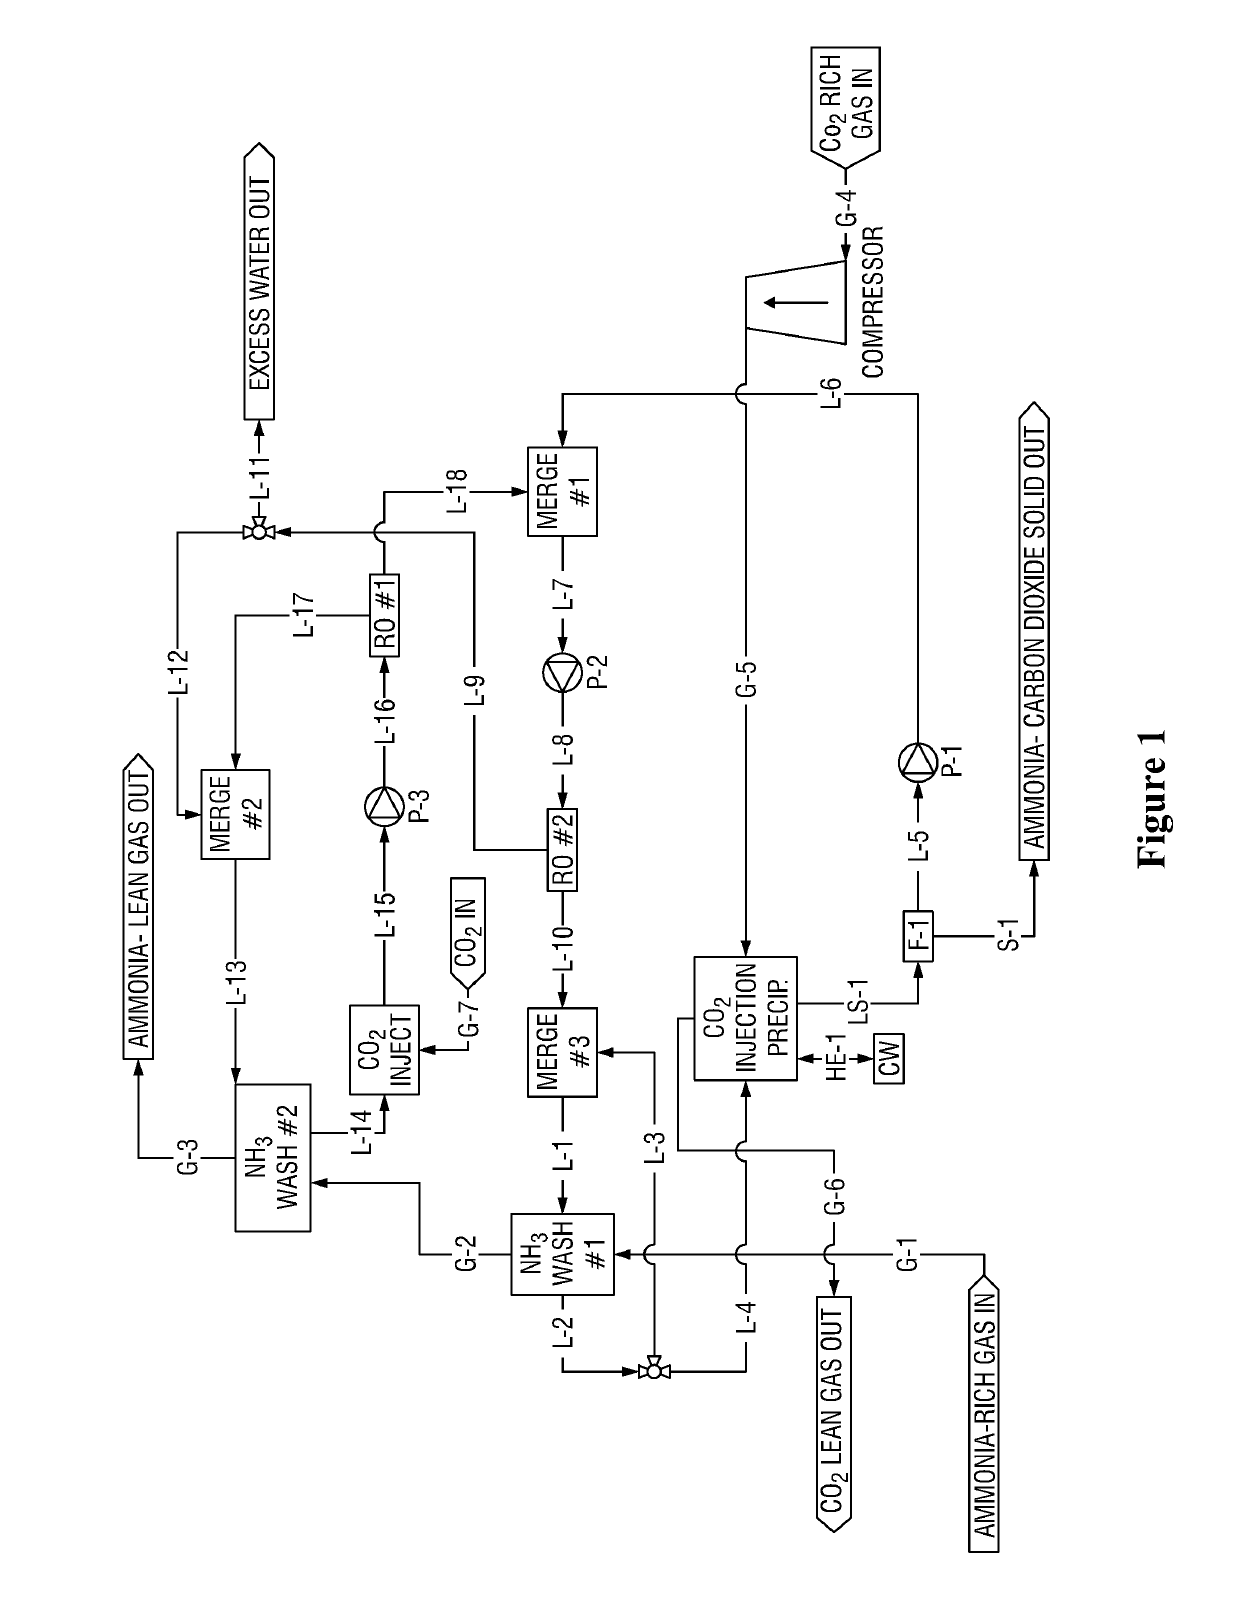 Systems and methods for ammonia recovery, acid gas separation, or combination thereof